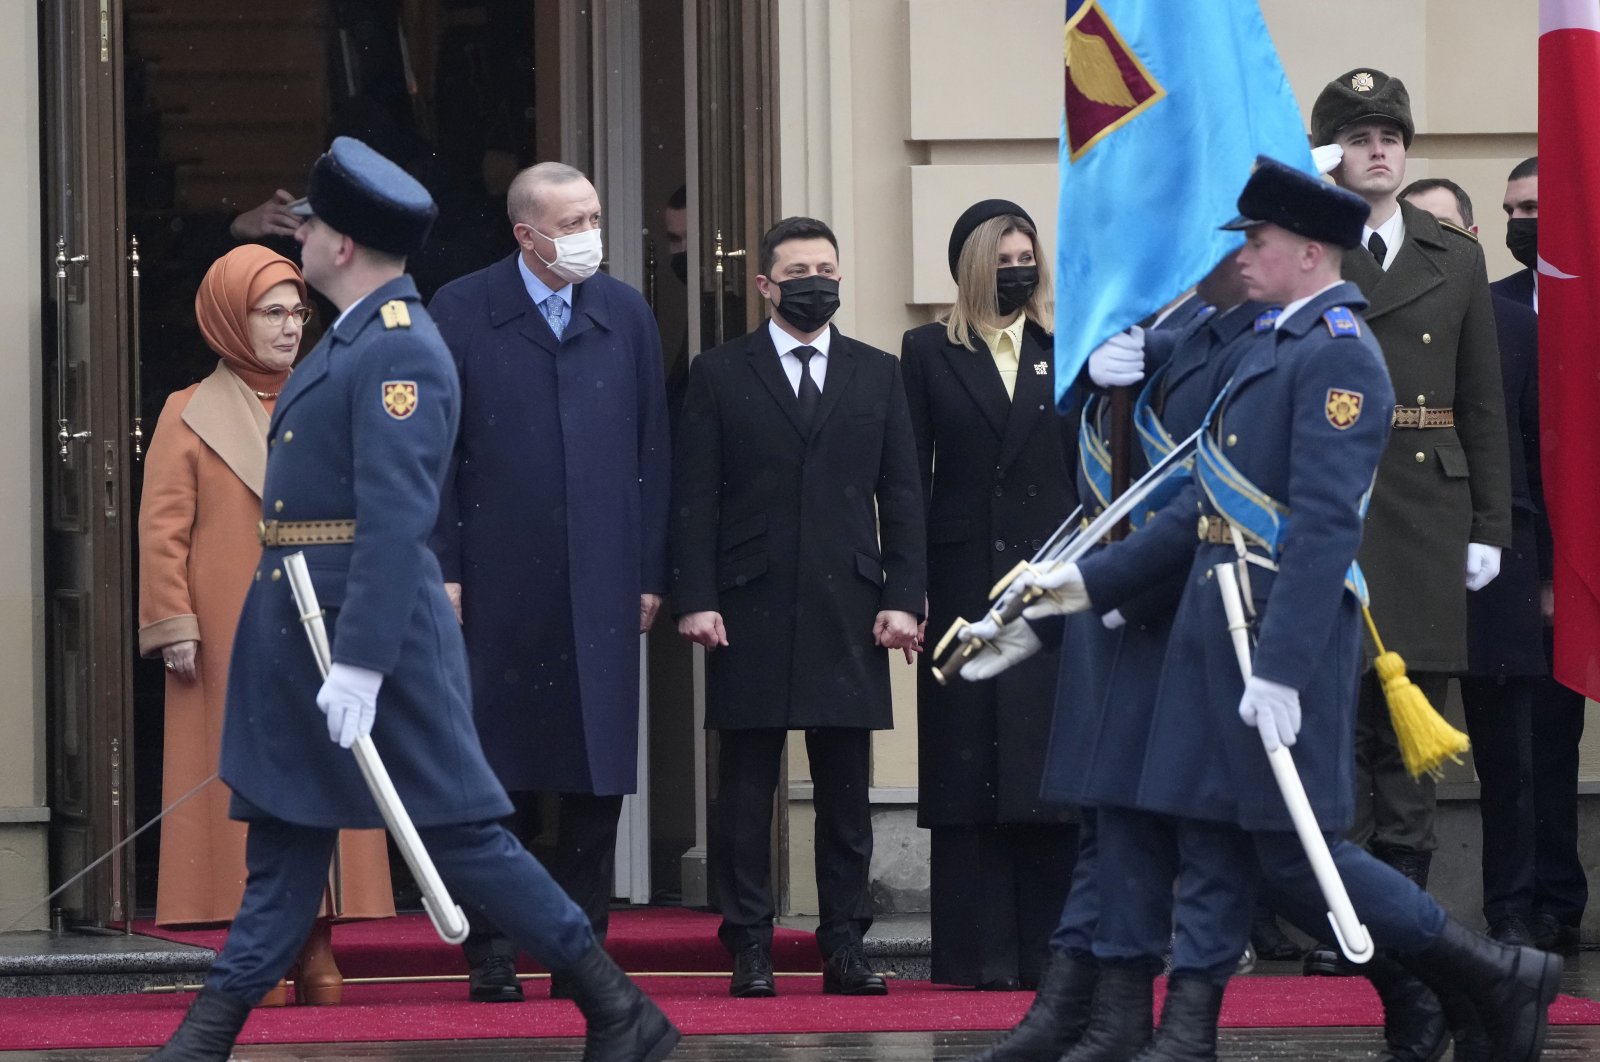 President Recep Tayyip Erdoğan (C-L) accompanied by his wife Emine (L), Ukrainian President Volodymyr Zelenskyy (C) and his wife Olena (C-R), review the honor guard during a welcome ceremony ahead of their meeting in Kyiv, Ukraine, Feb. 3, 2022. (AP Photo)